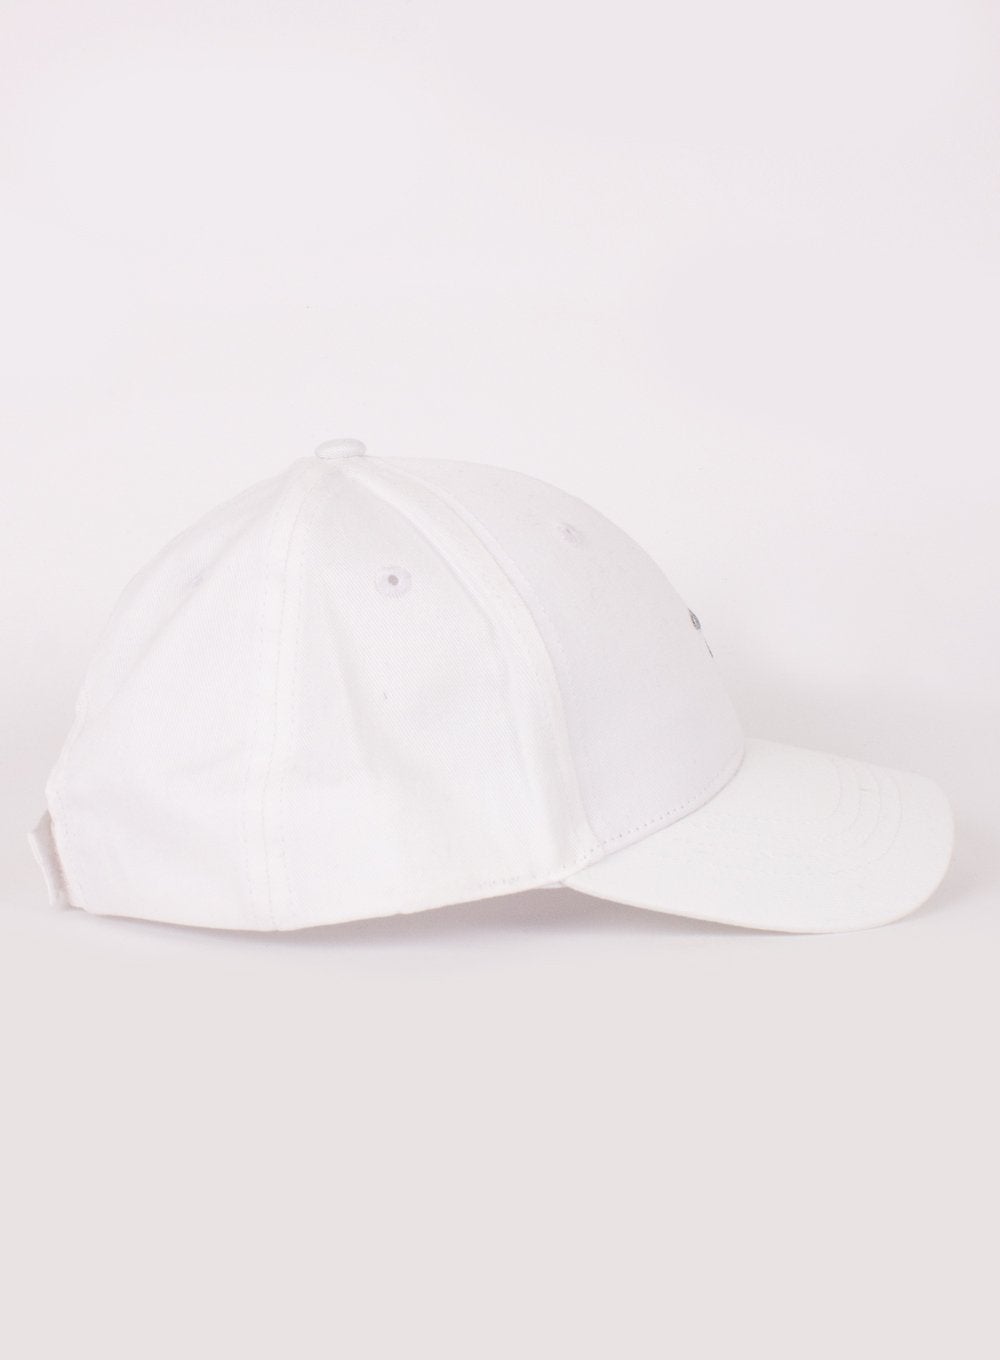 Charlie Cap in White | Trotters Childrenswear – Trotters Childrenswear USA